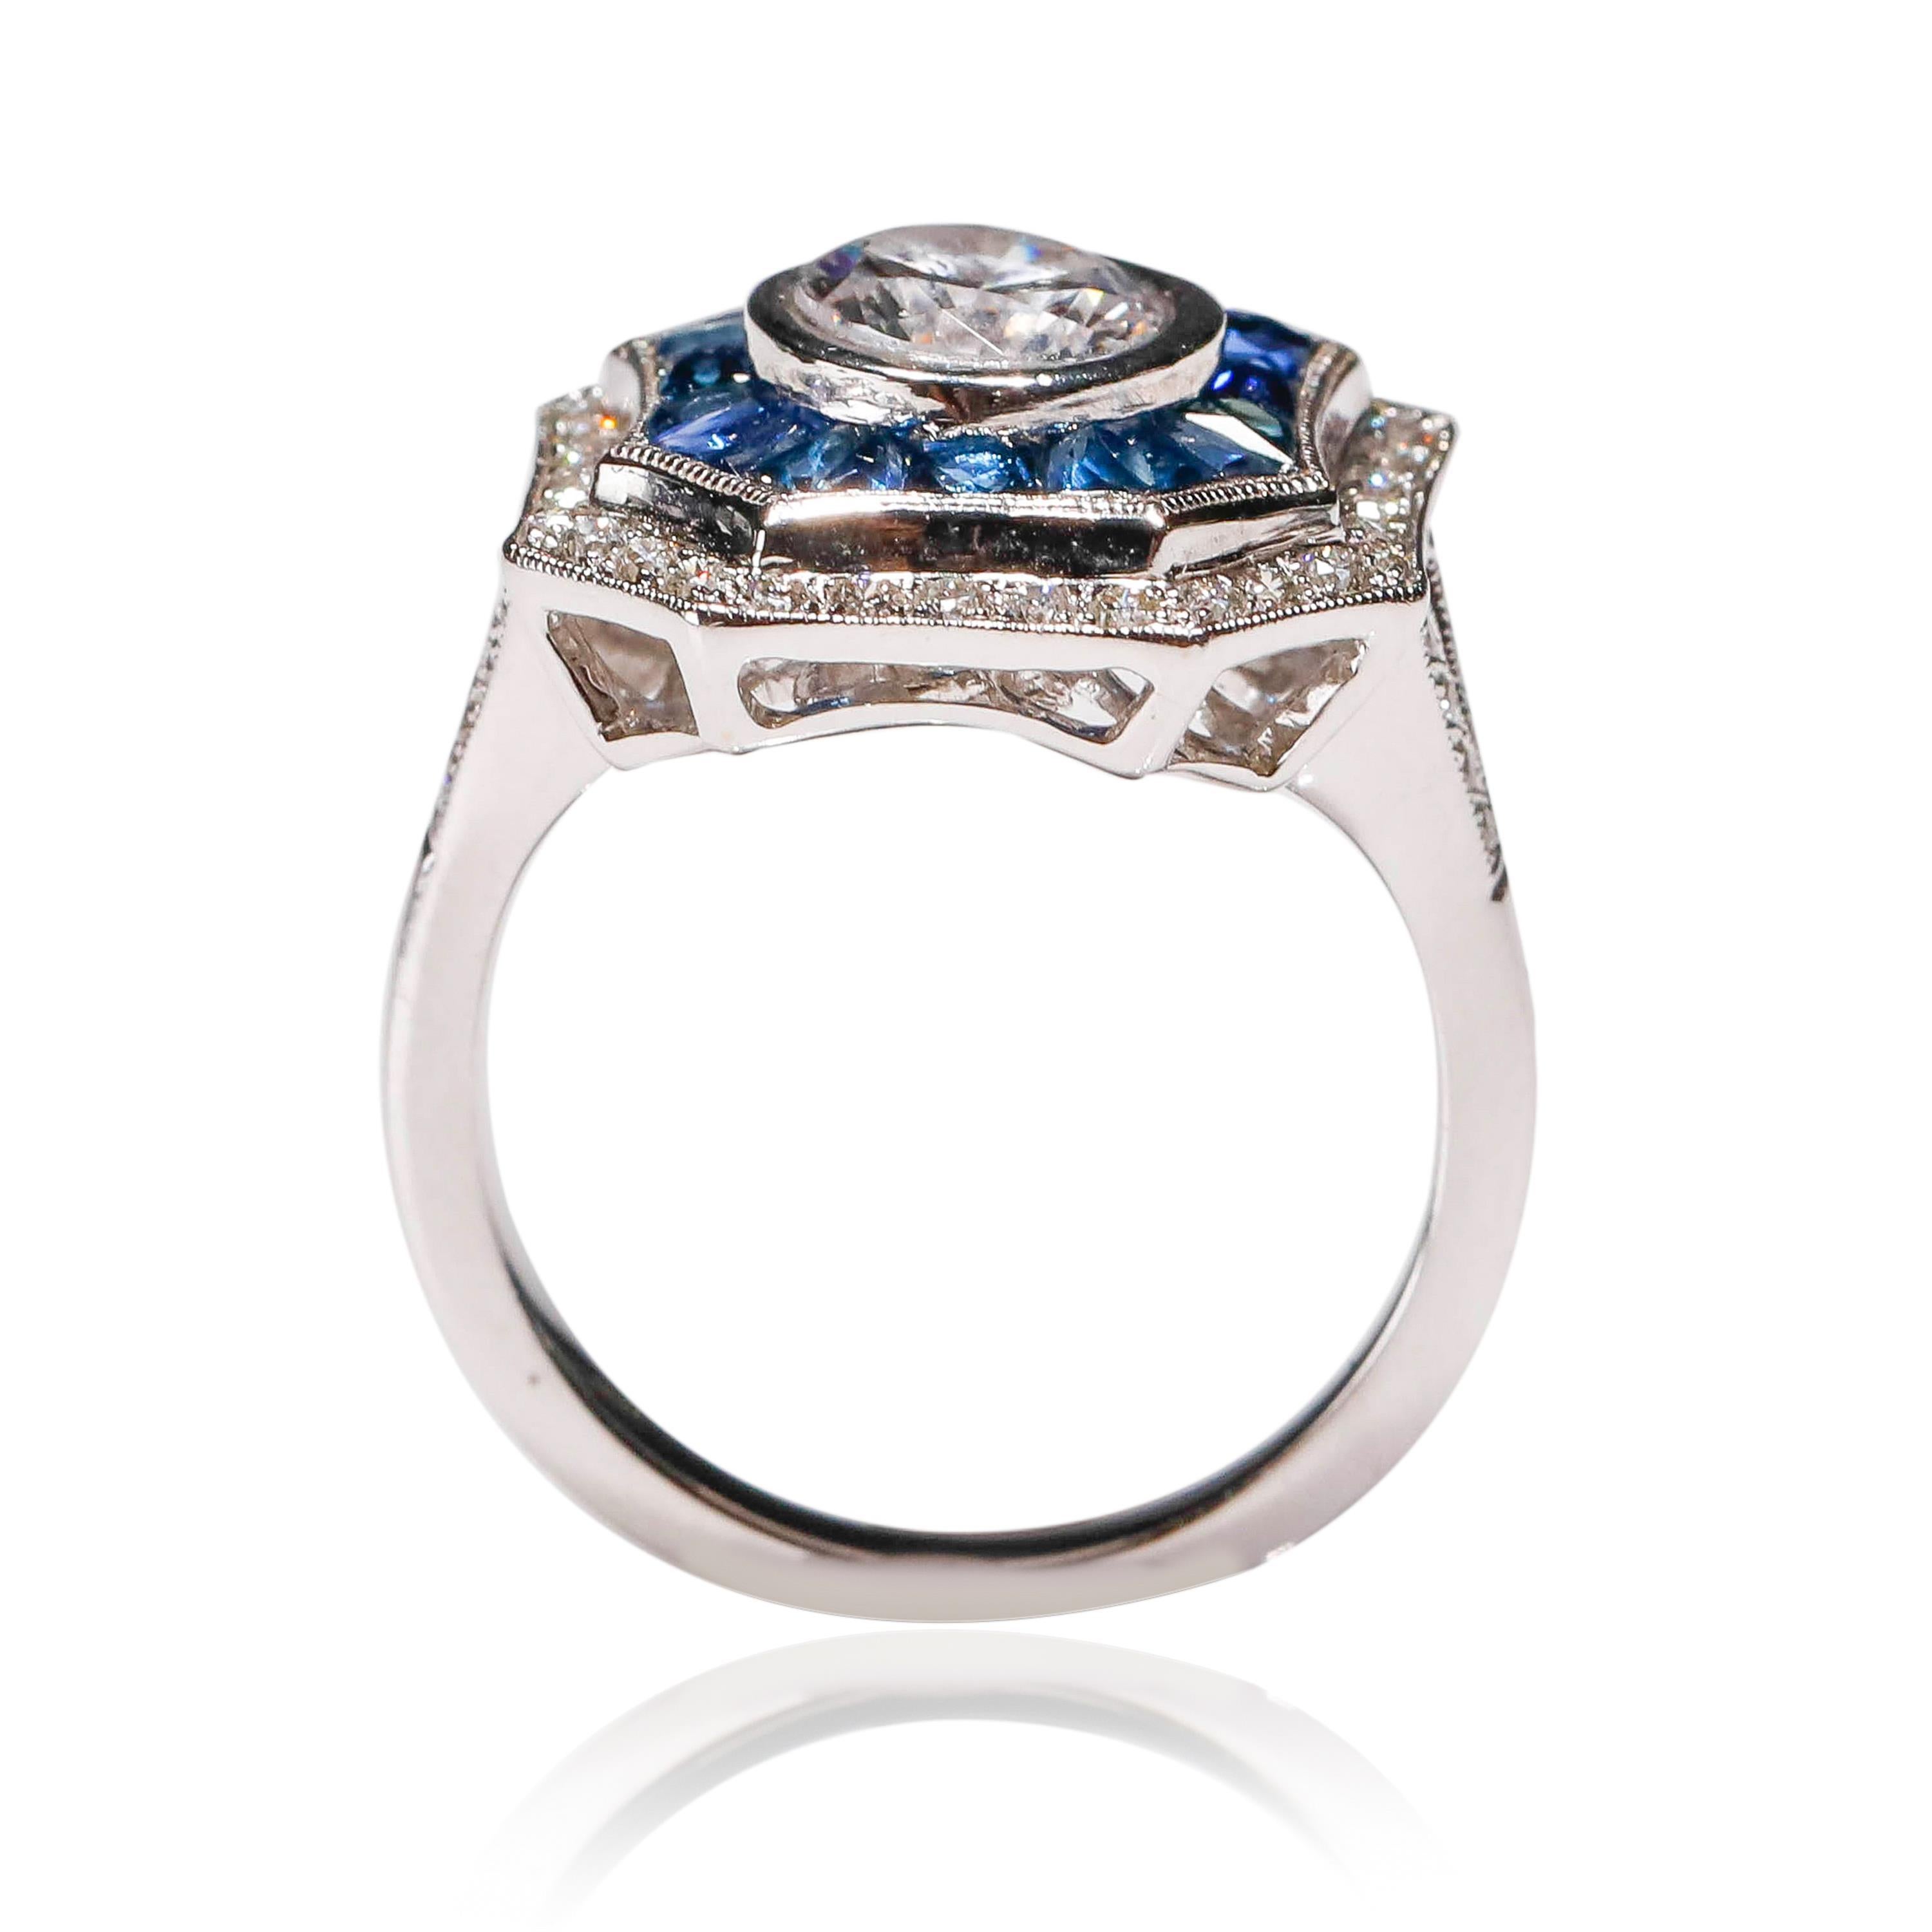 Art Deco Inspired New 1.7 carat Blue Sapphire 0.42 Carat Diamond 18 Karat White Gold Ring

Crafted in 18kt White Gold, this Unique design showcases a Blue Sapphire 1.7 TCW, set in a halo of round-cut mesmerizing diamonds, Polished to a brilliant